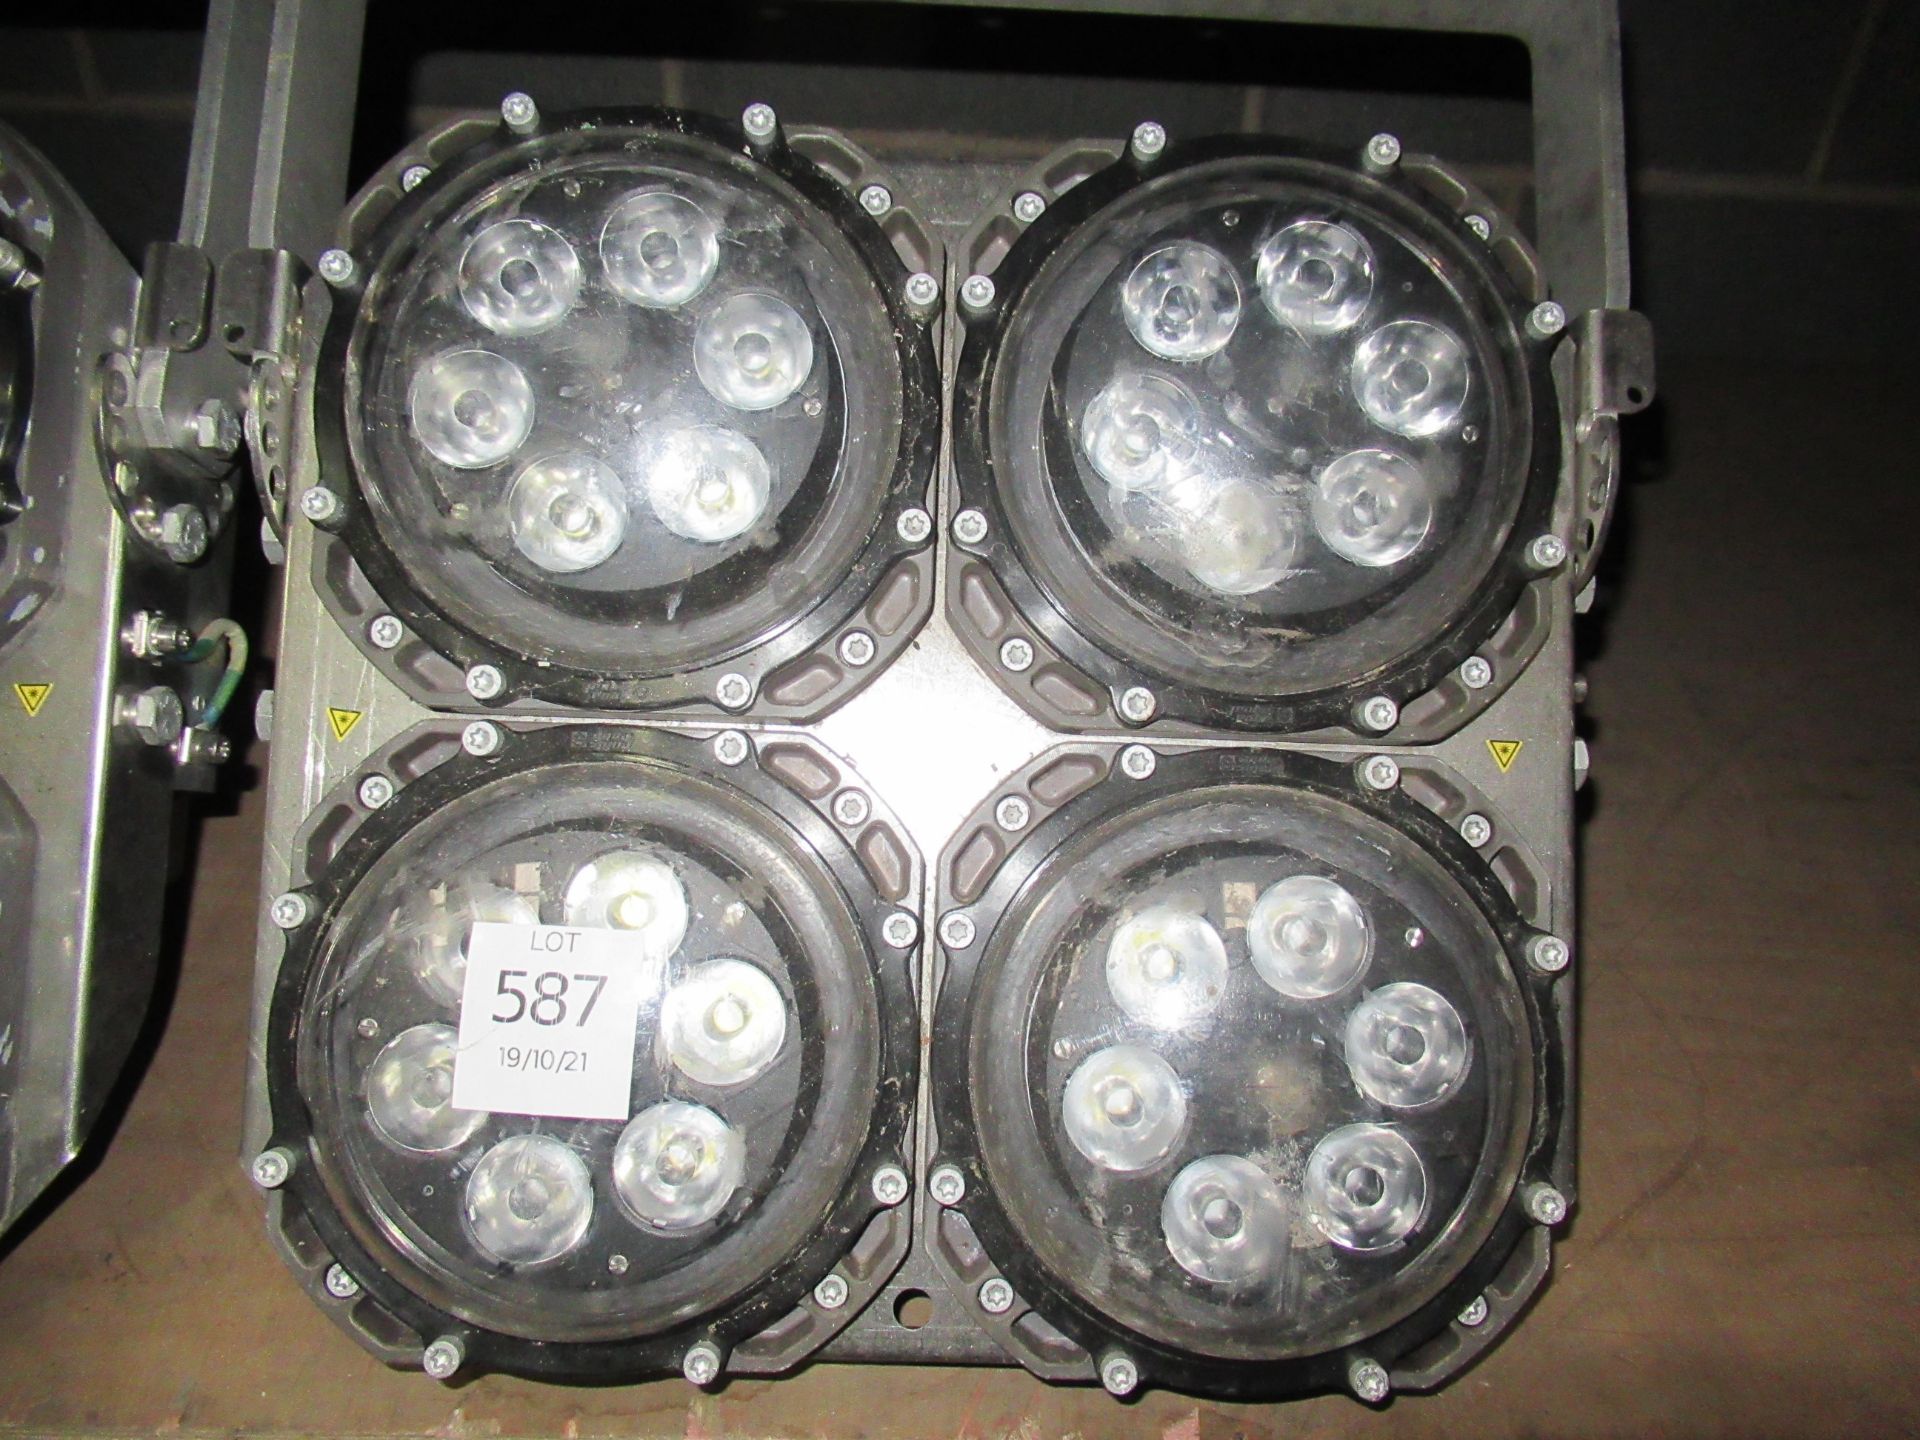 A heavy duty LED 4 Cluster, industrial light